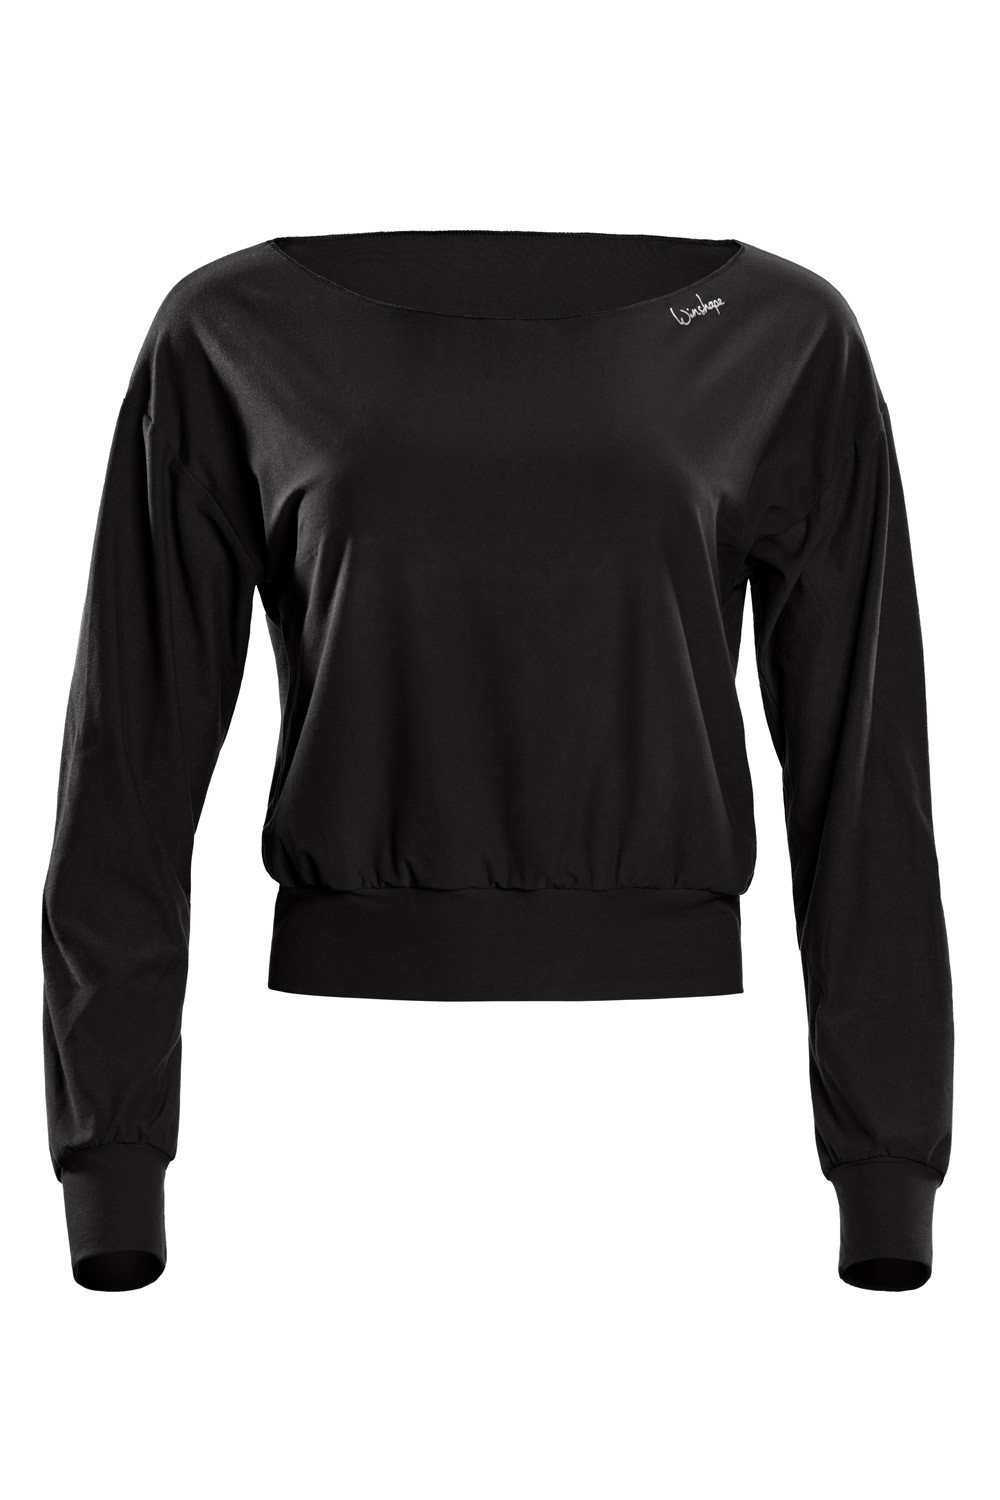 Top Winshape Functional Style Light Long Soft LS003LS, and Cropped schwarz, Sleeve Street